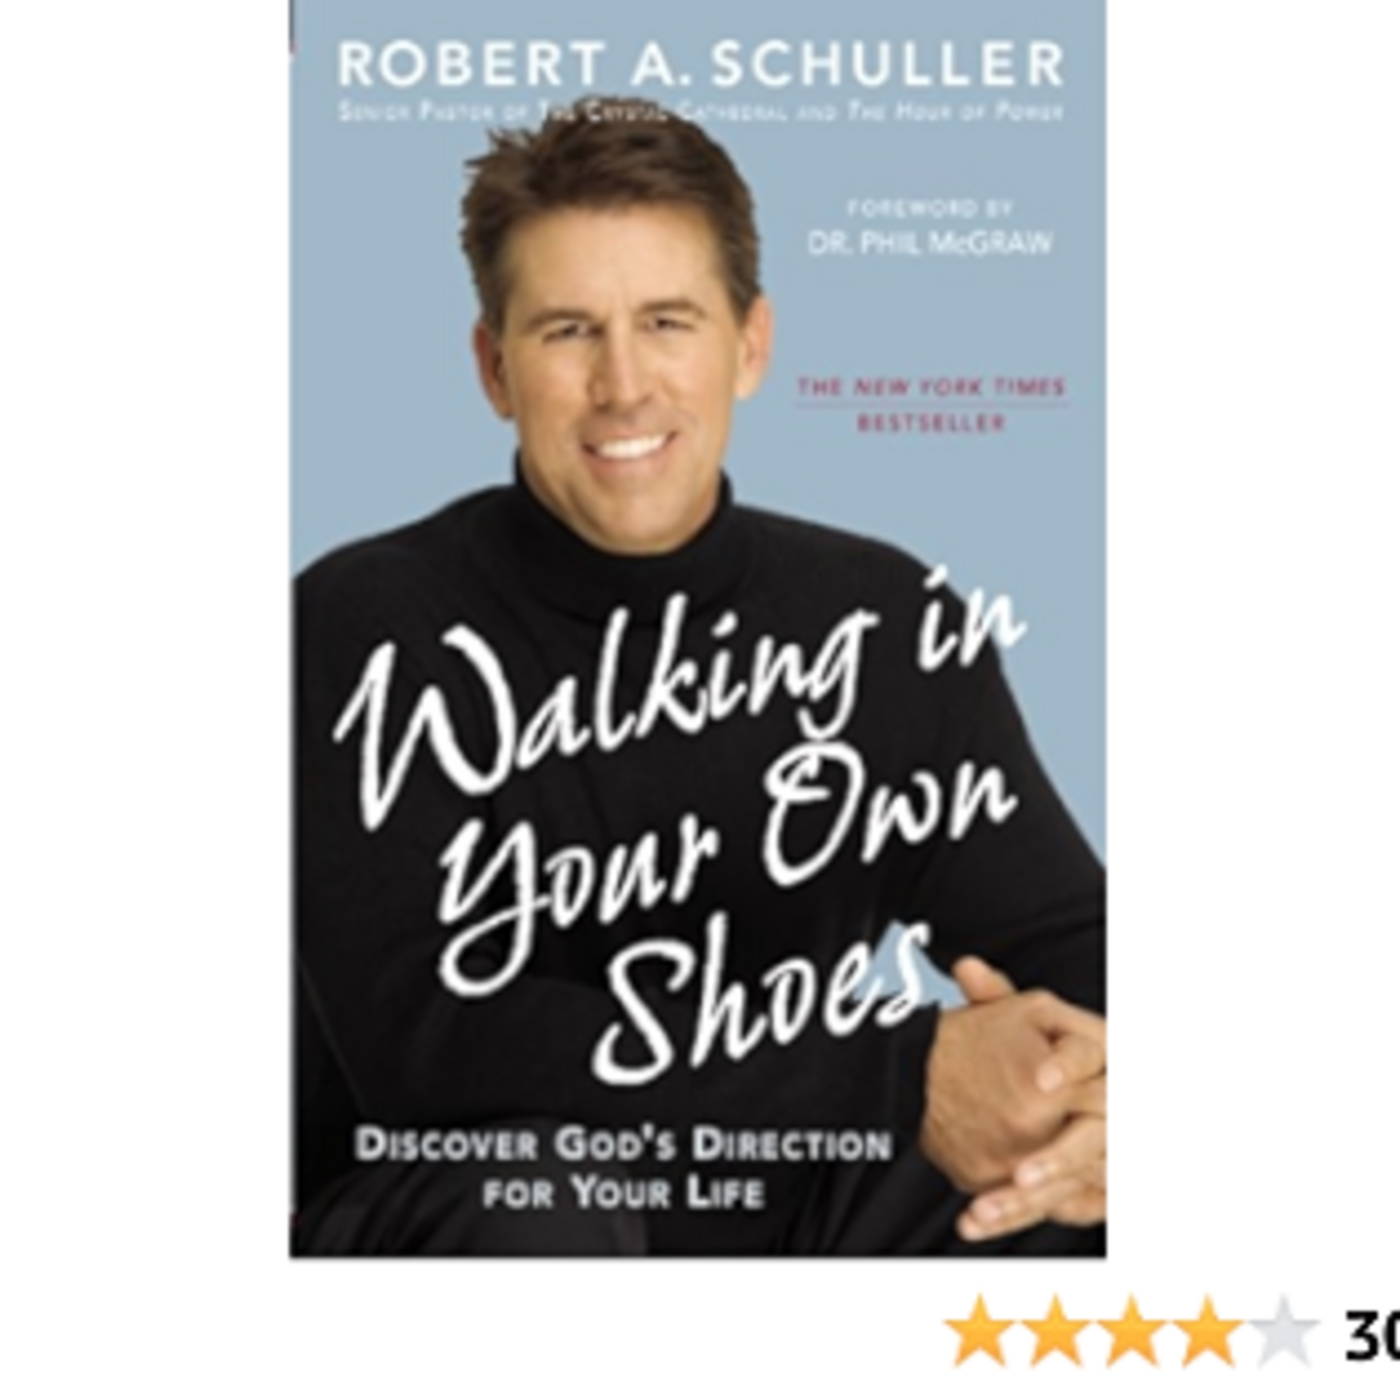 Episode 161: Walking in Your Own Shoes